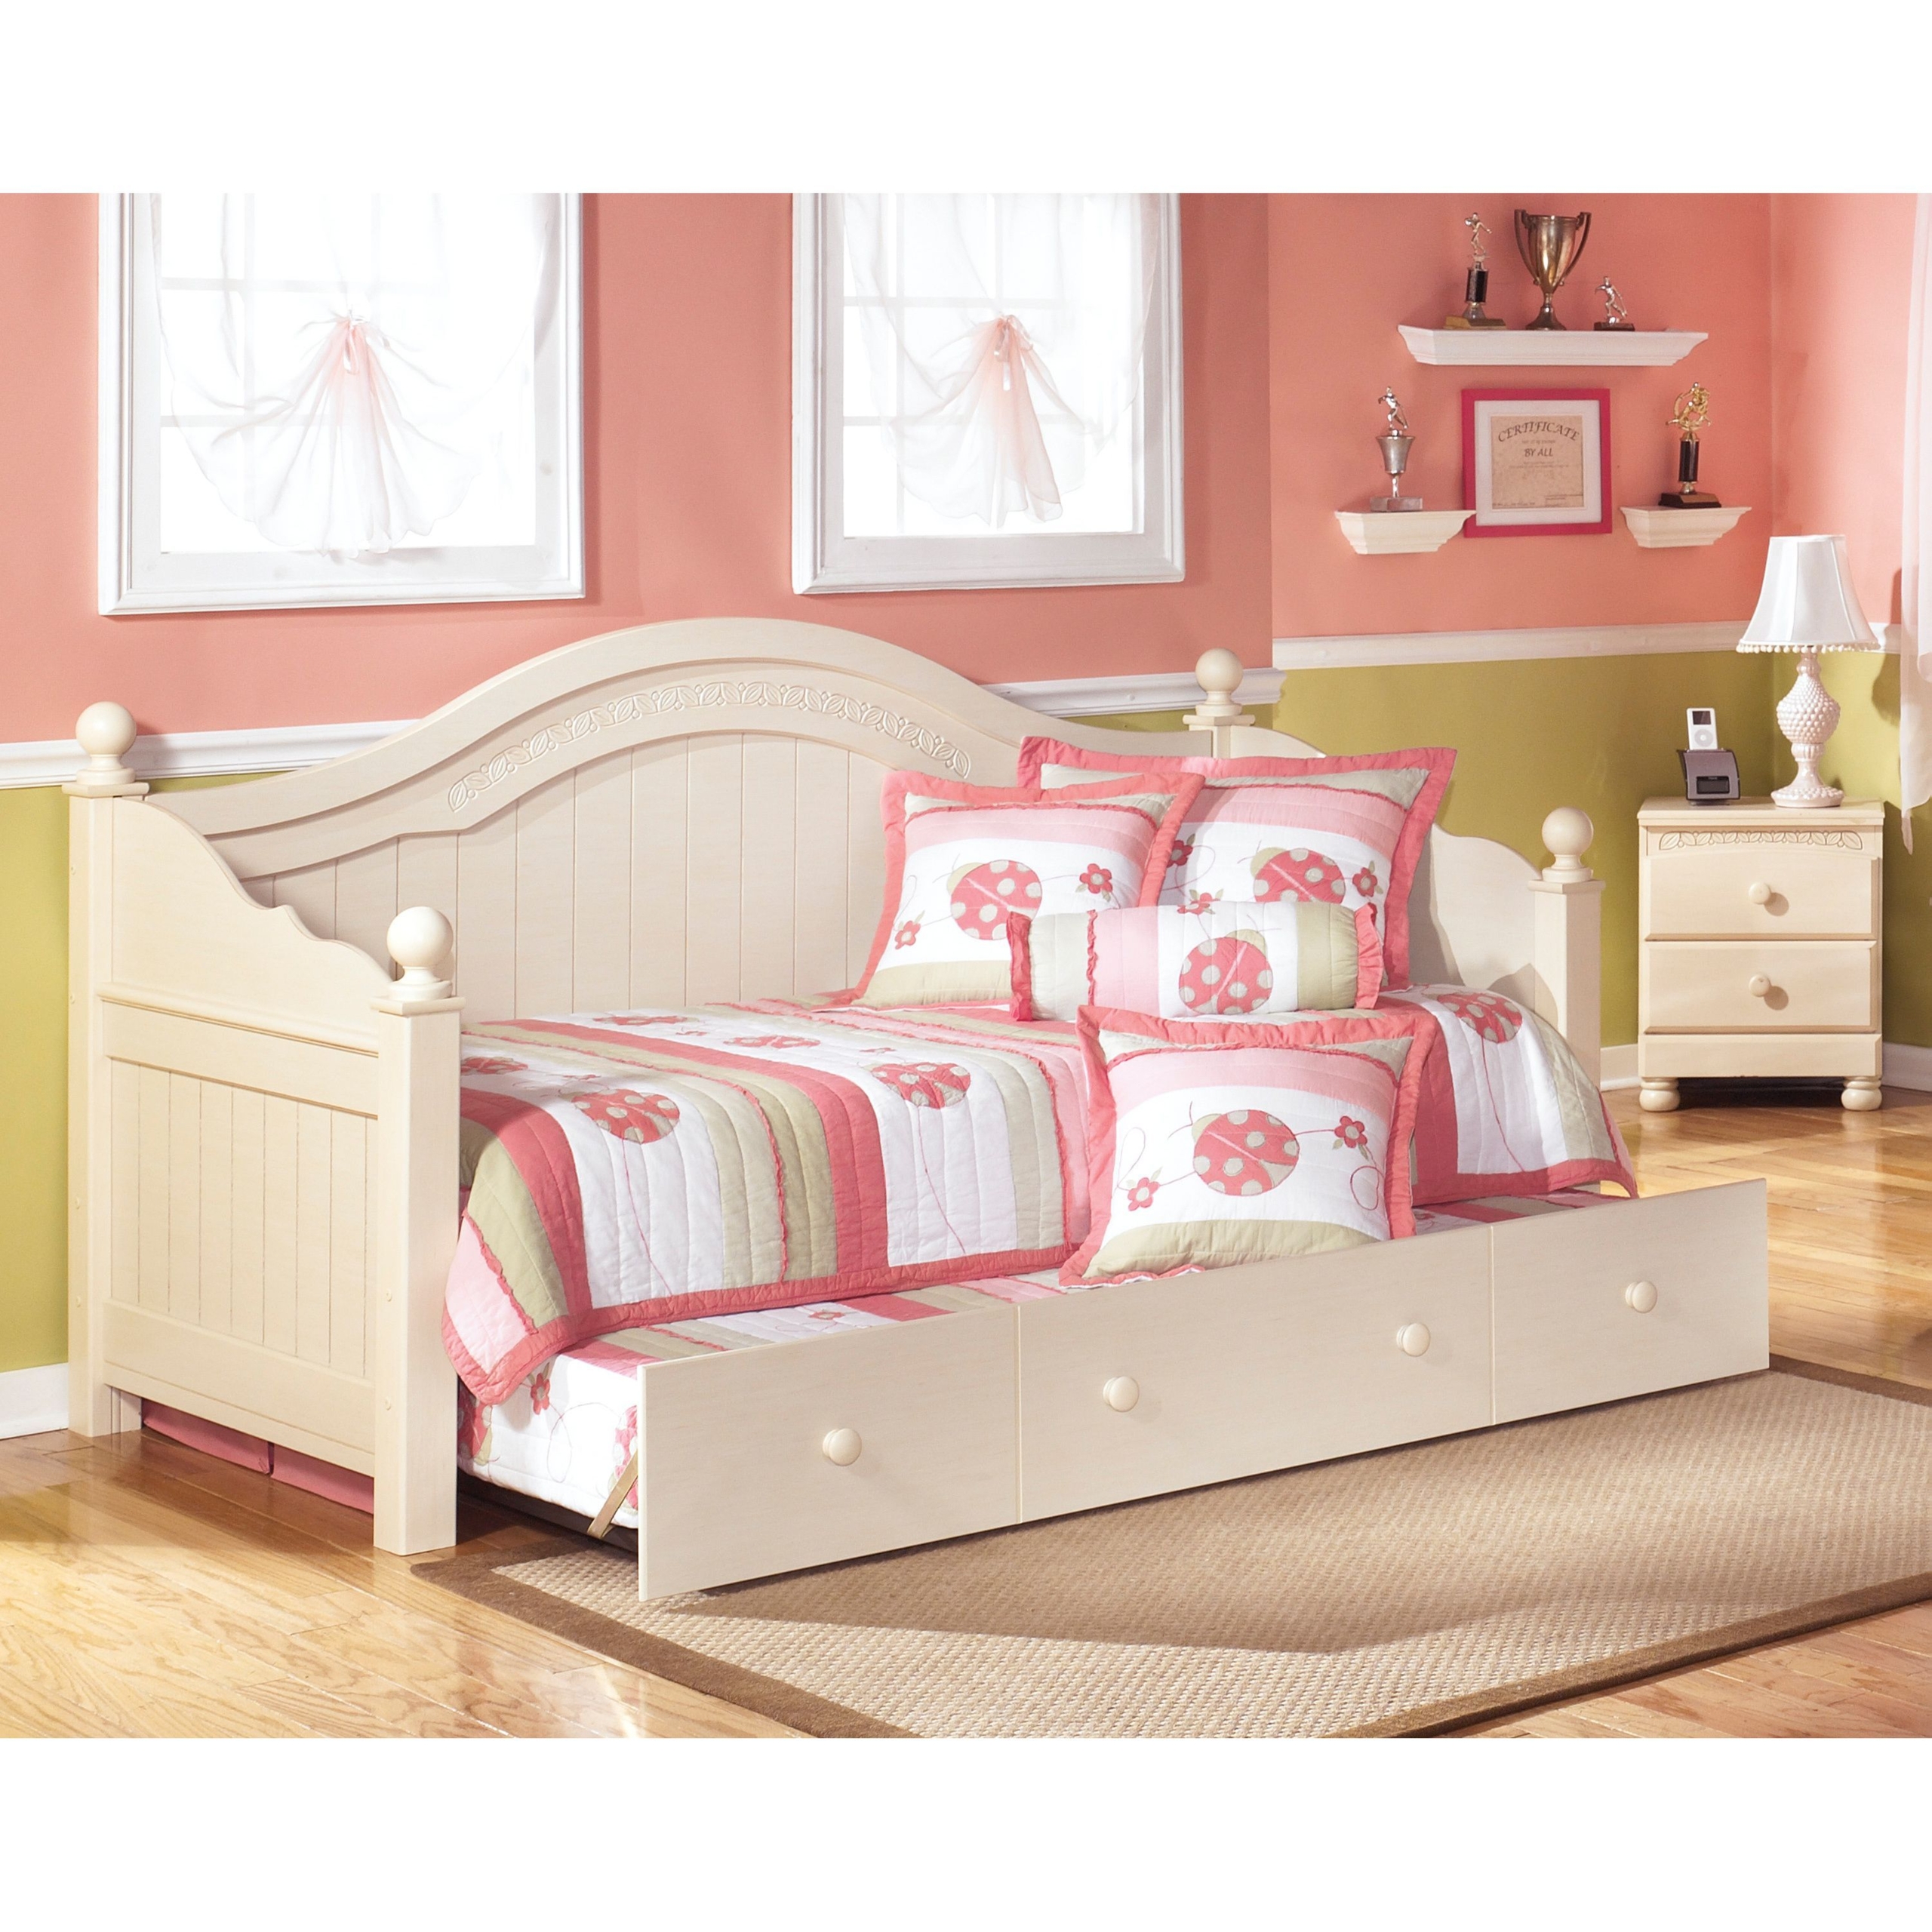 girl beds for sale